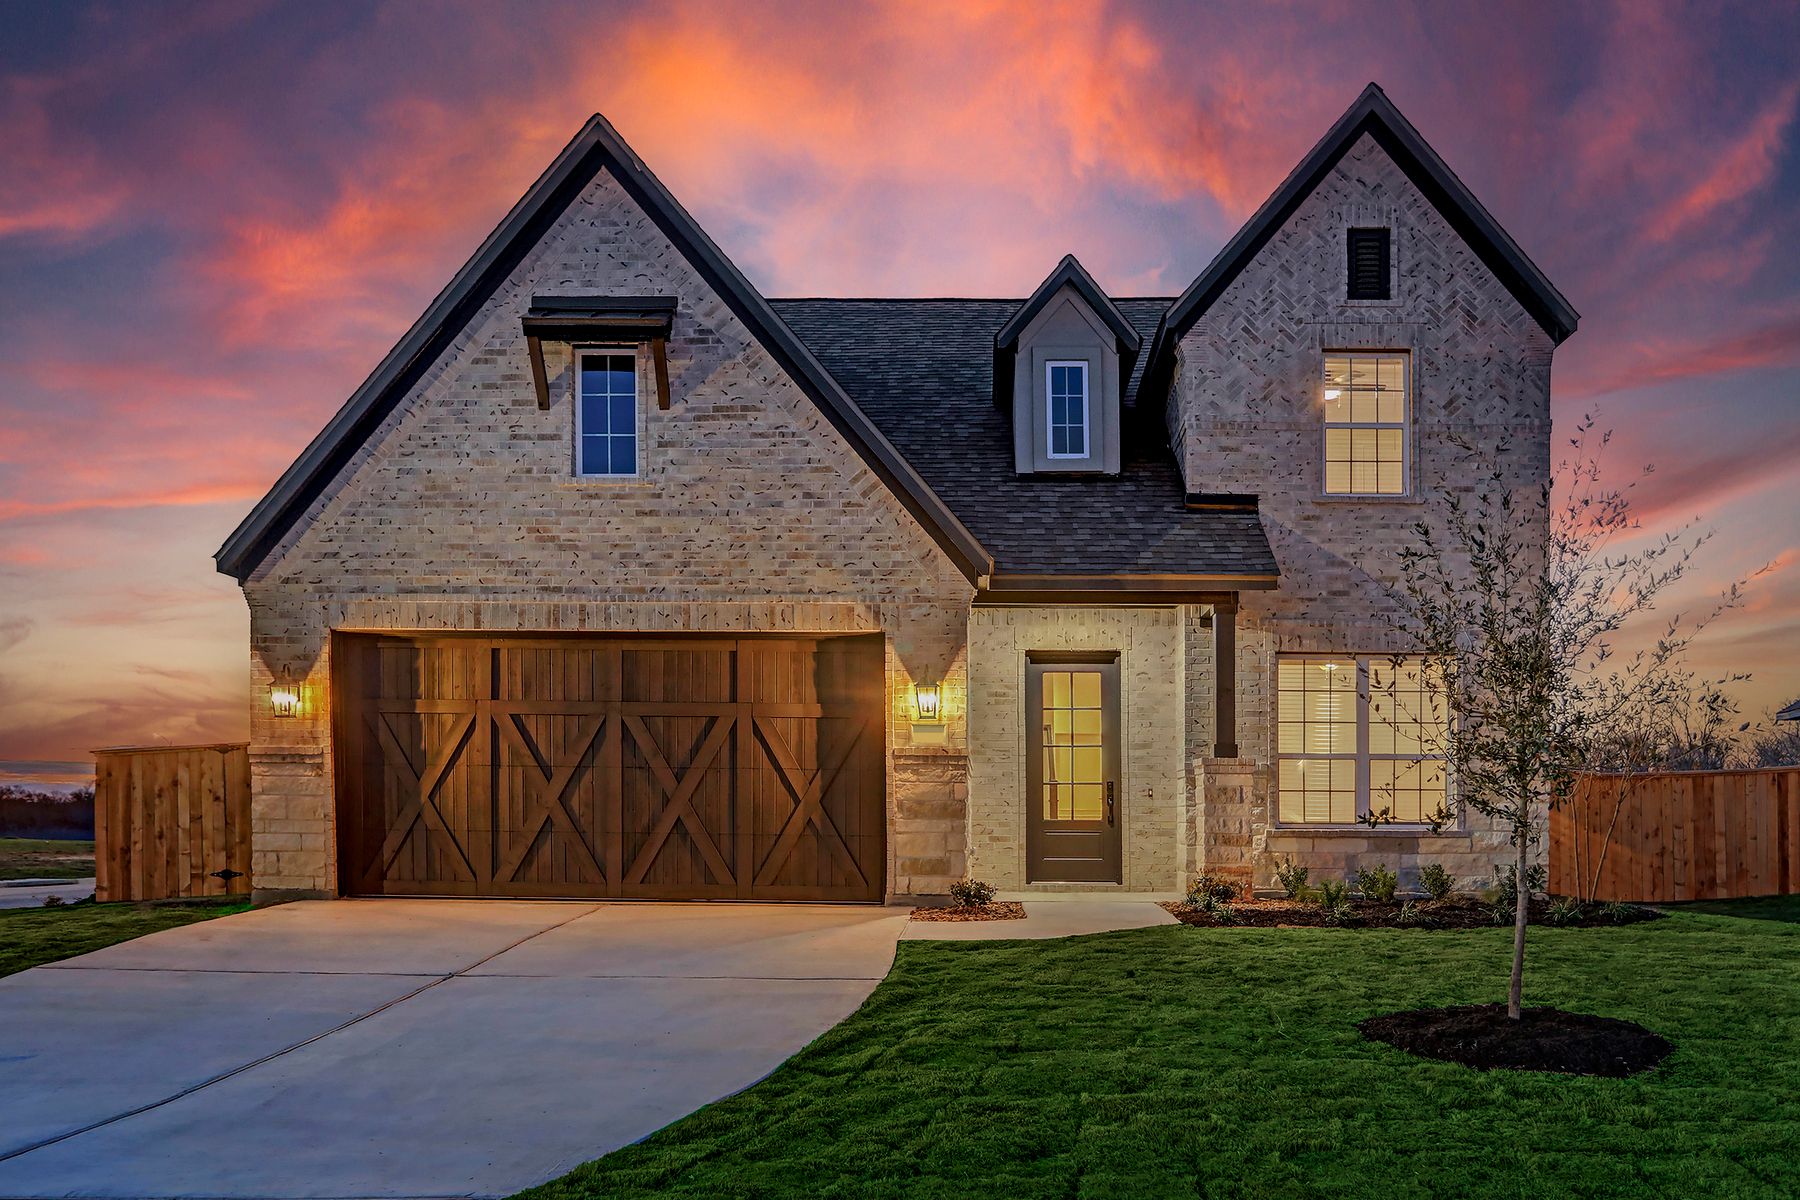 Exterior of the Jordan at dusk, highlighting the stunning details of the home.:Terrata Homes at ShadowGlen